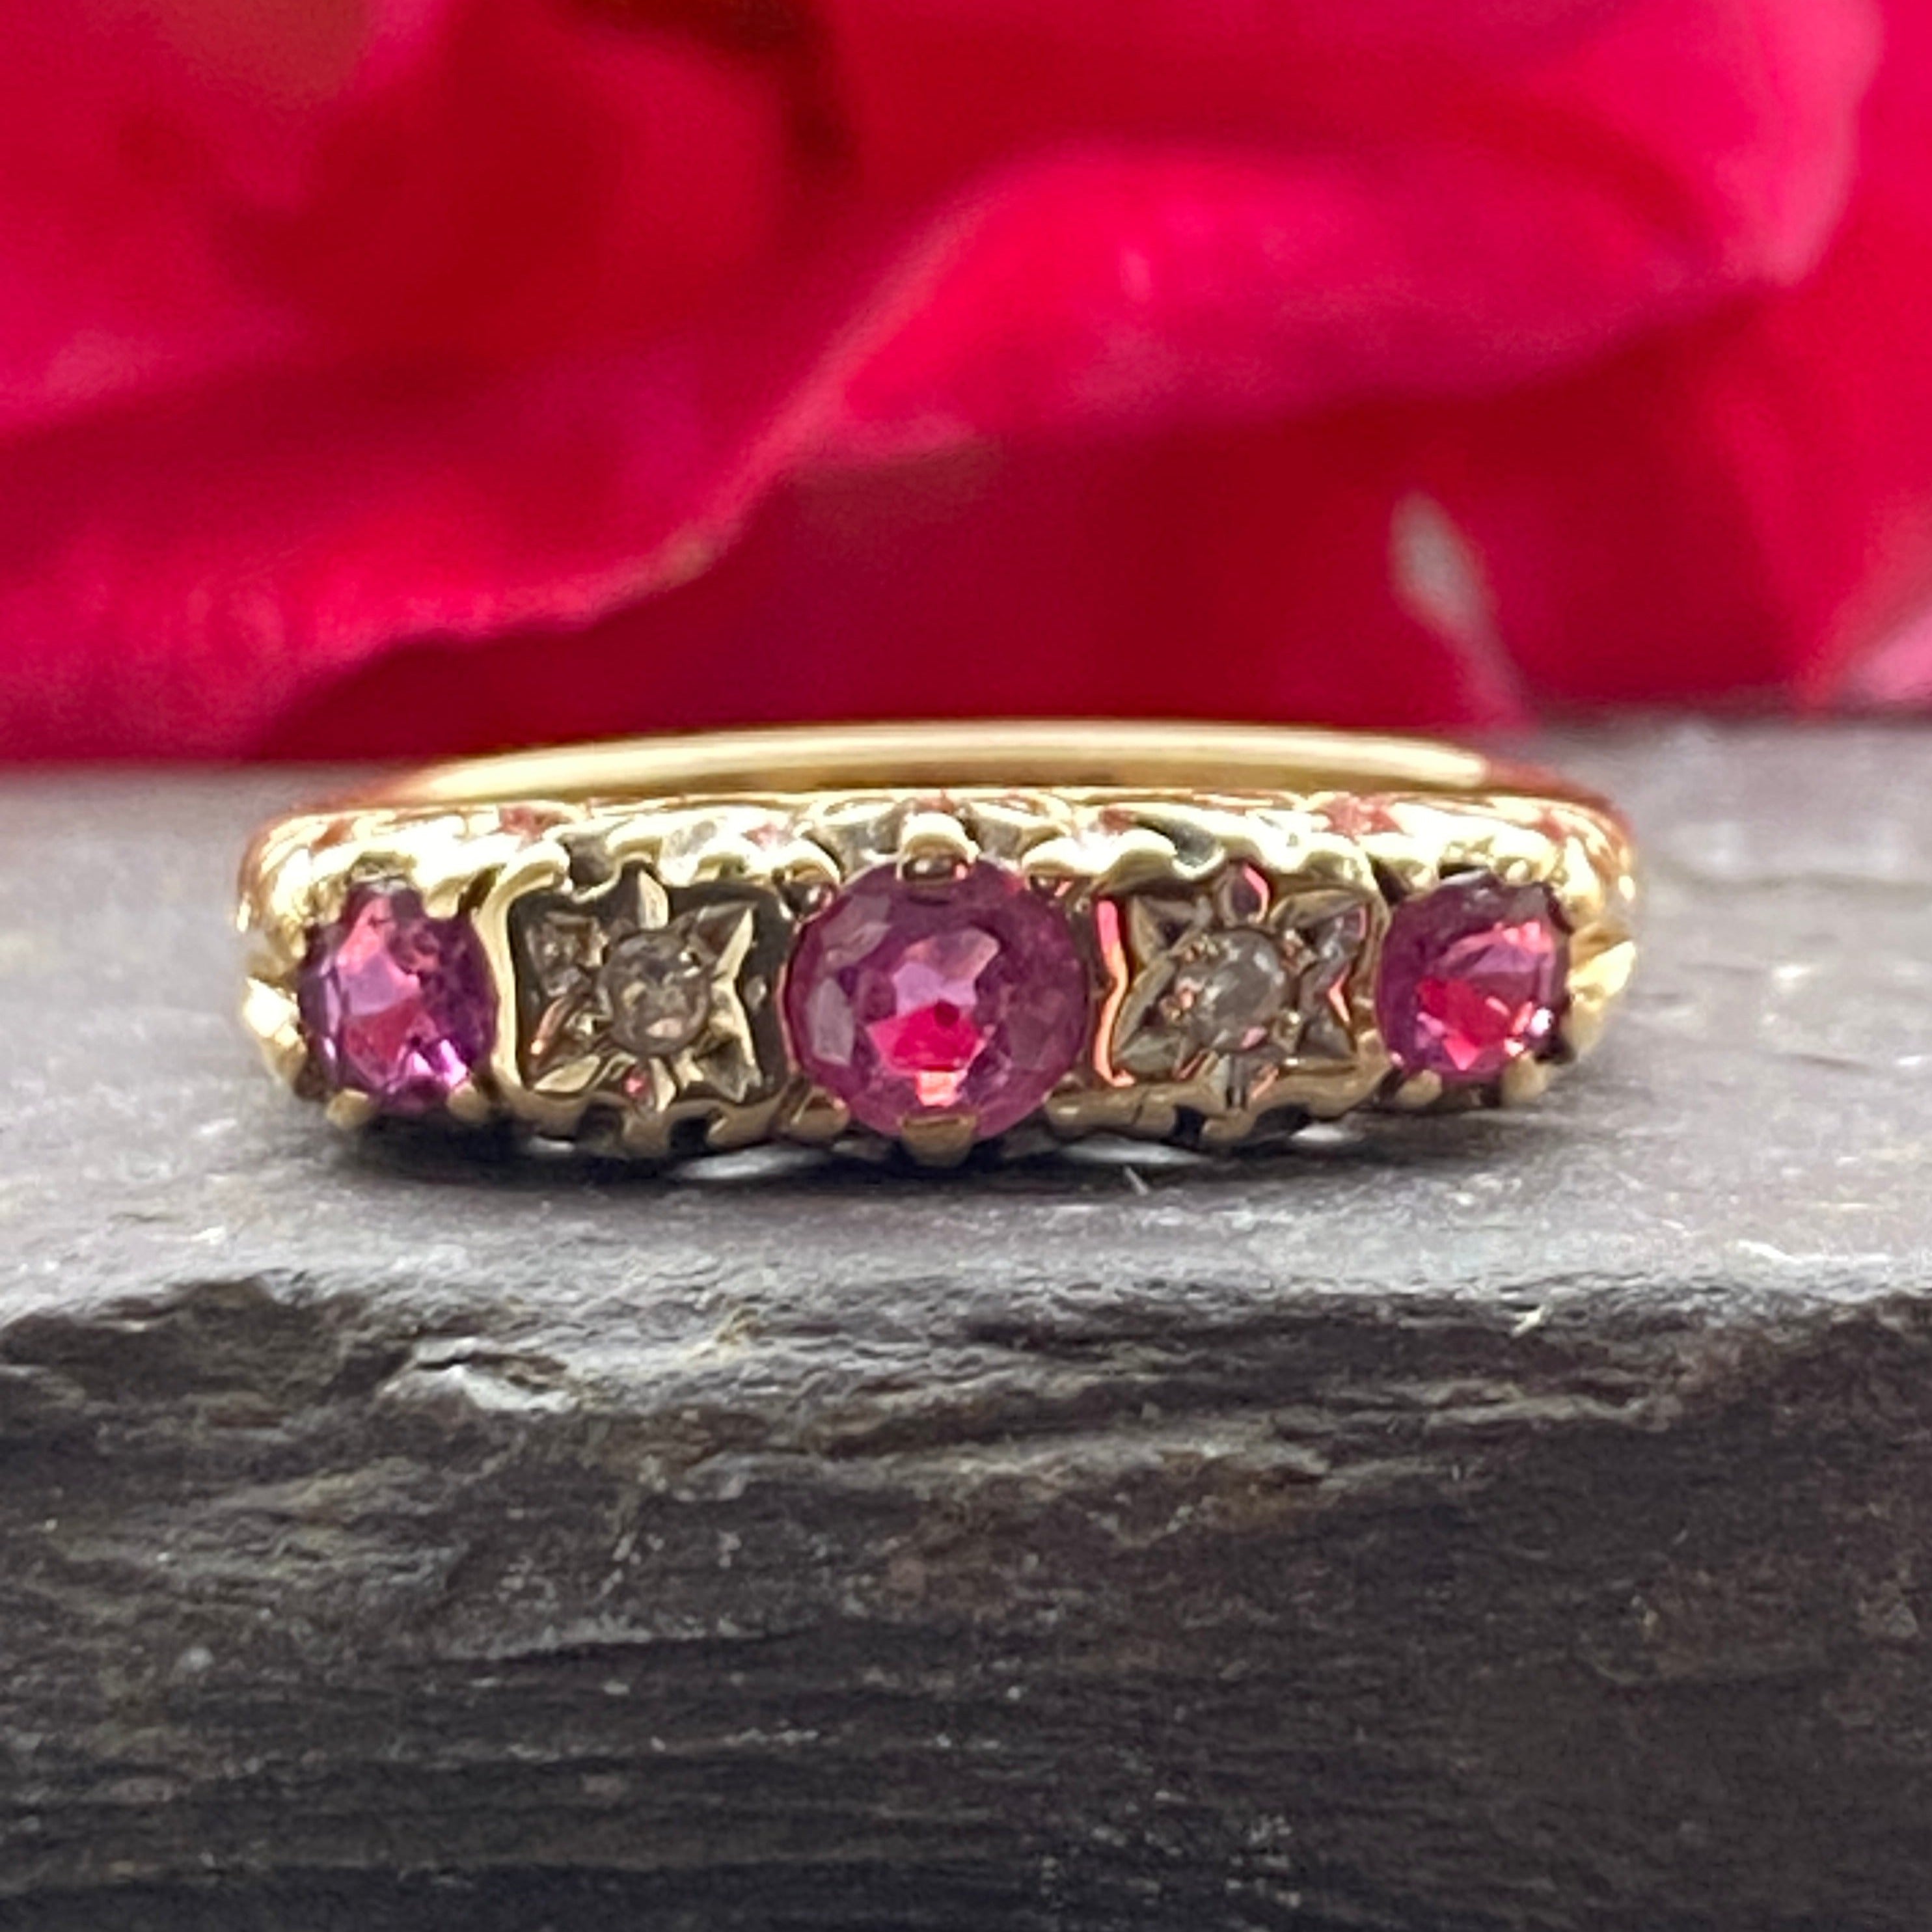 Vintage 9ct Ruby & Diamond Ring Victorian Carved Head Style